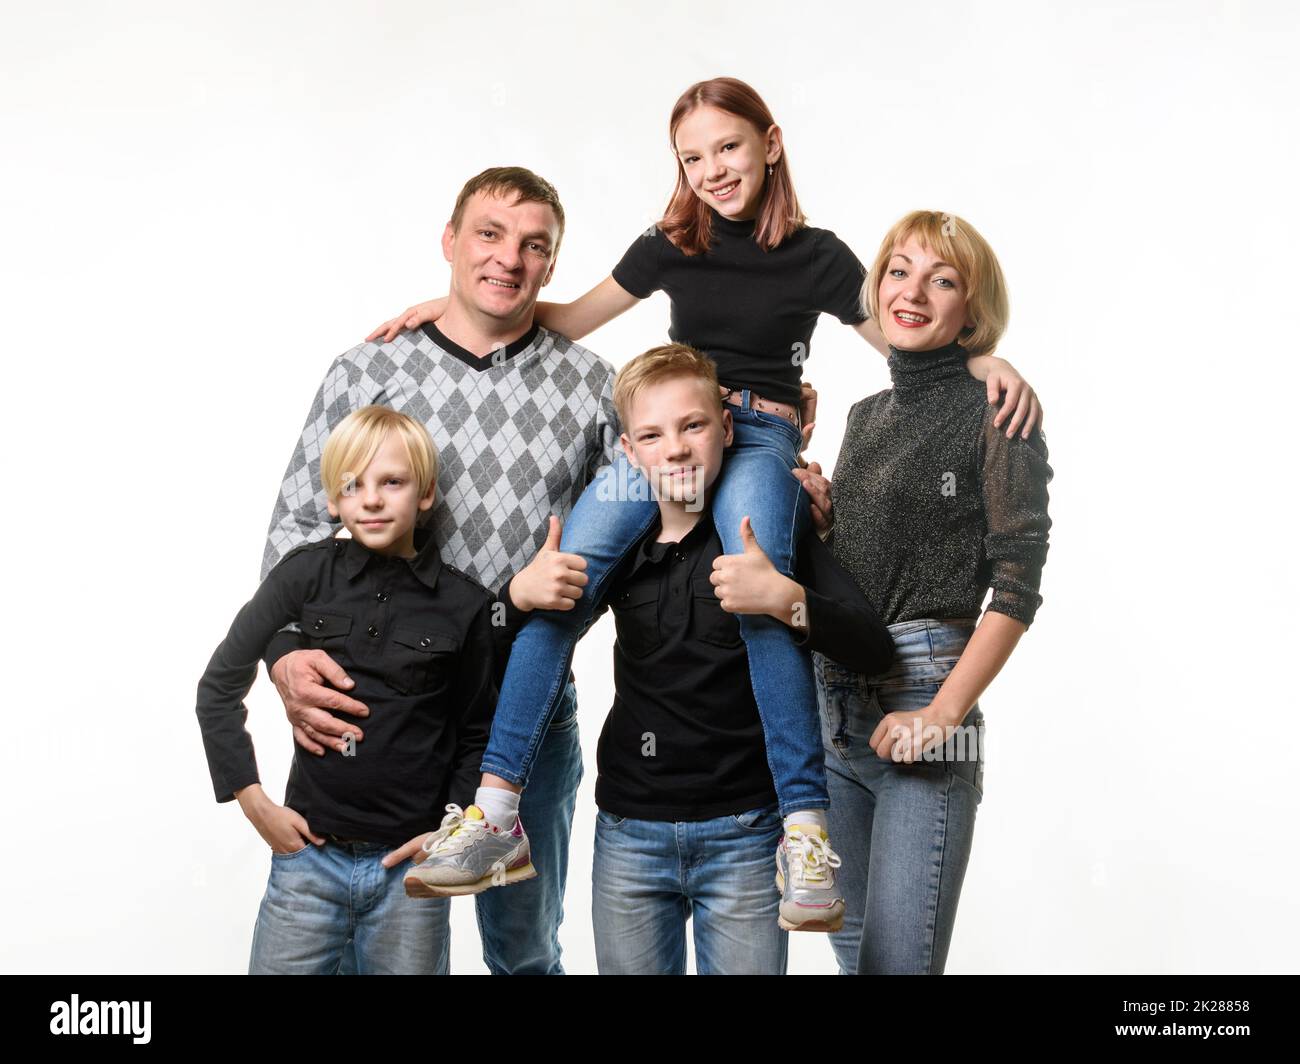 Half-length portrait of an ordinary Russian family in casual clothes on a white background Stock Photo